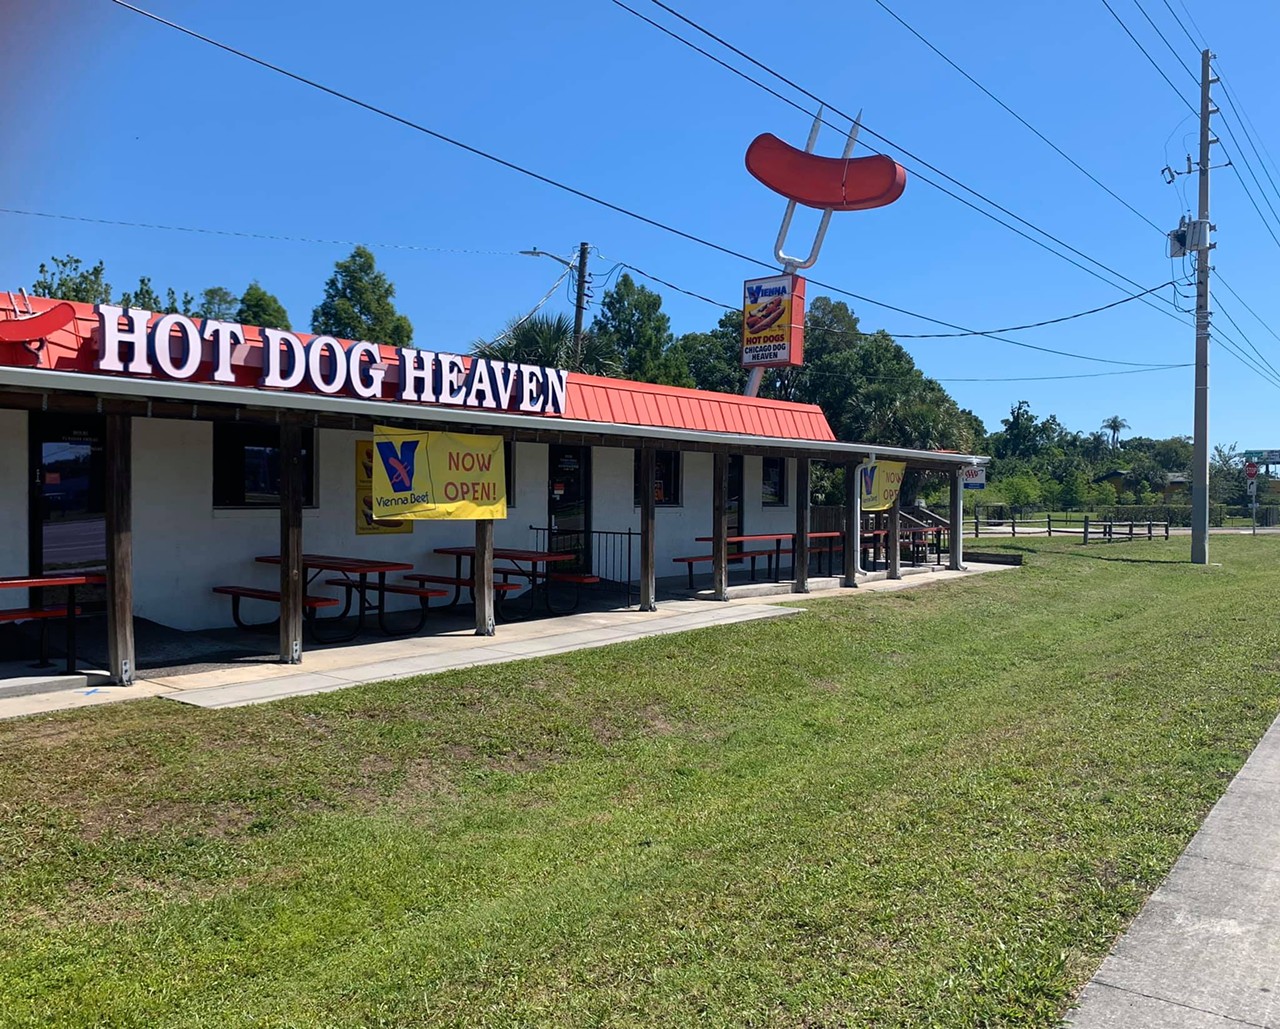 Hot Dog Heaven 
407-282-5746, 5355 E. Colonial Dr.
Hot Dog Heaven seems to be an easy pick for most, with one user deeming it as “the only answer” to the question of which fries in town are best.
